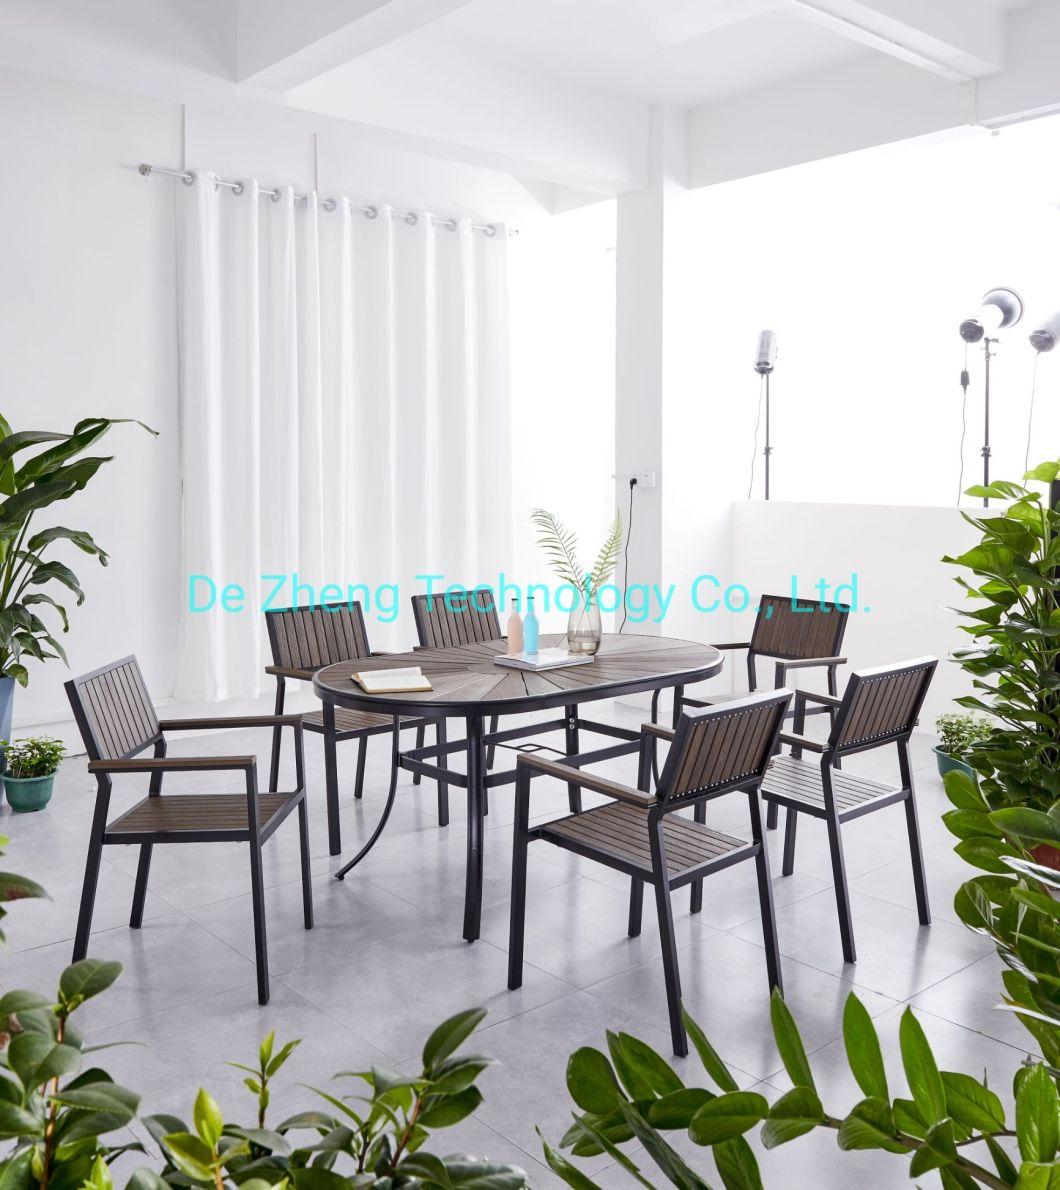 Garden Plastic Wood Folding Dining Sets Table and Chairs Balcony Chairs